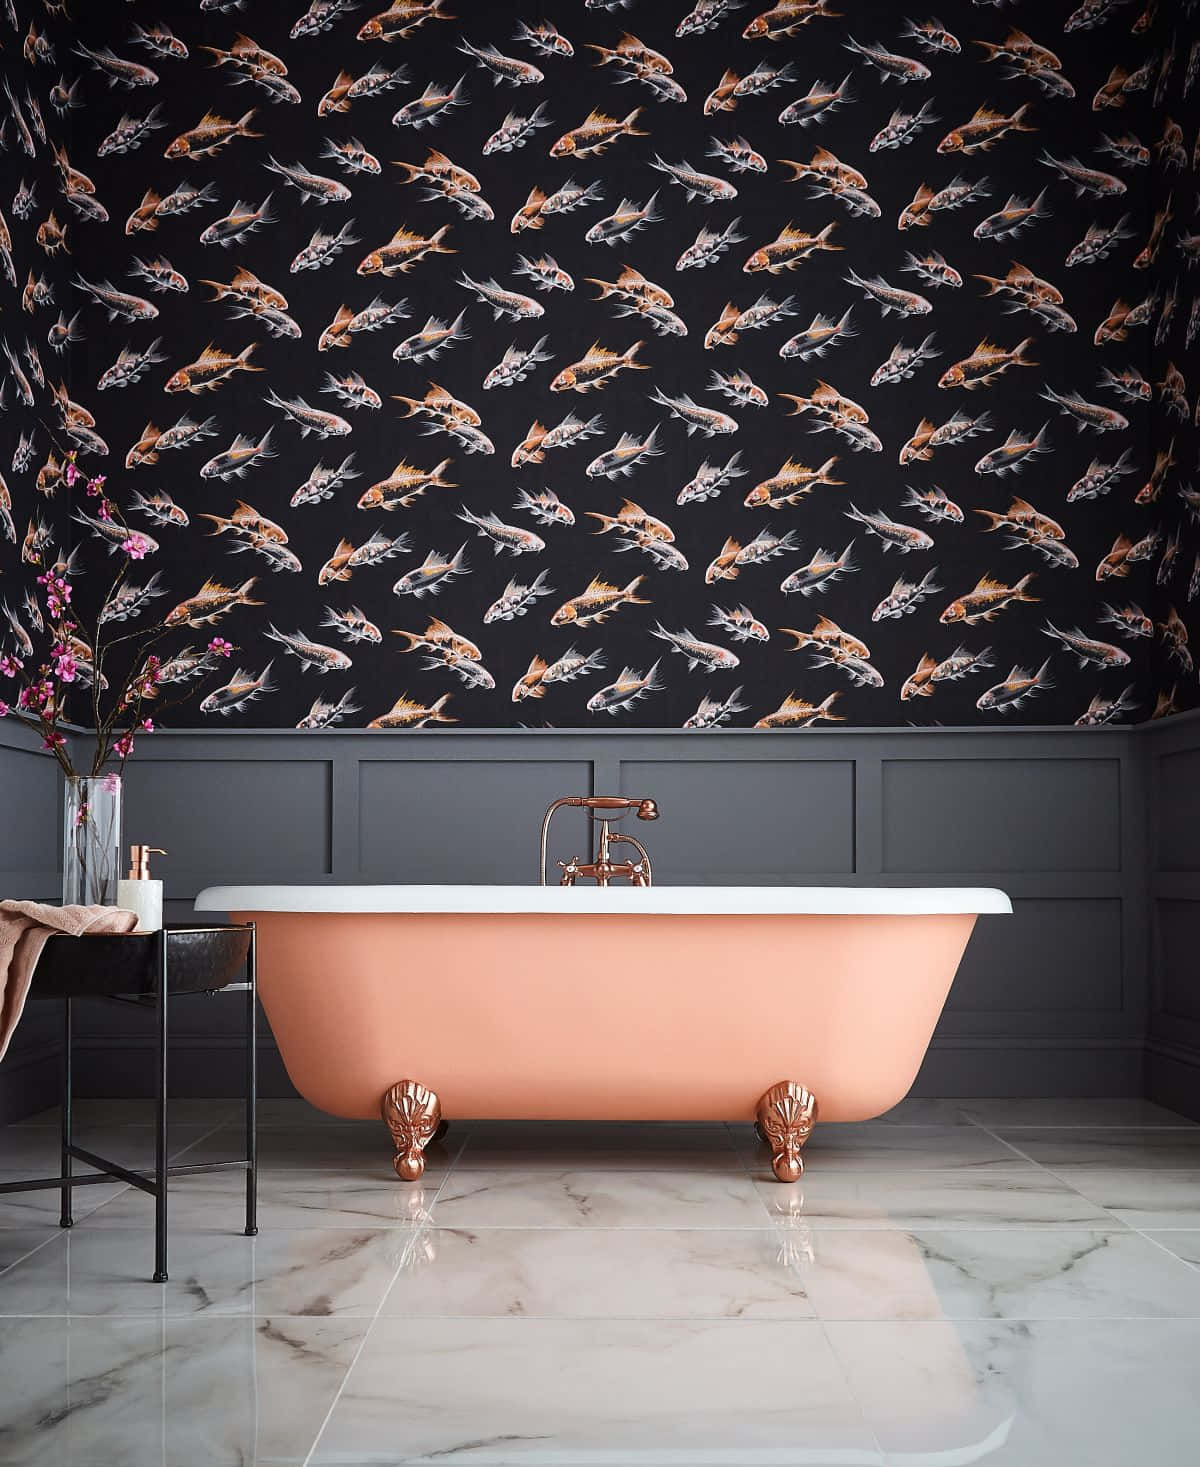 Bathroom Fish Patterned Walls Picture